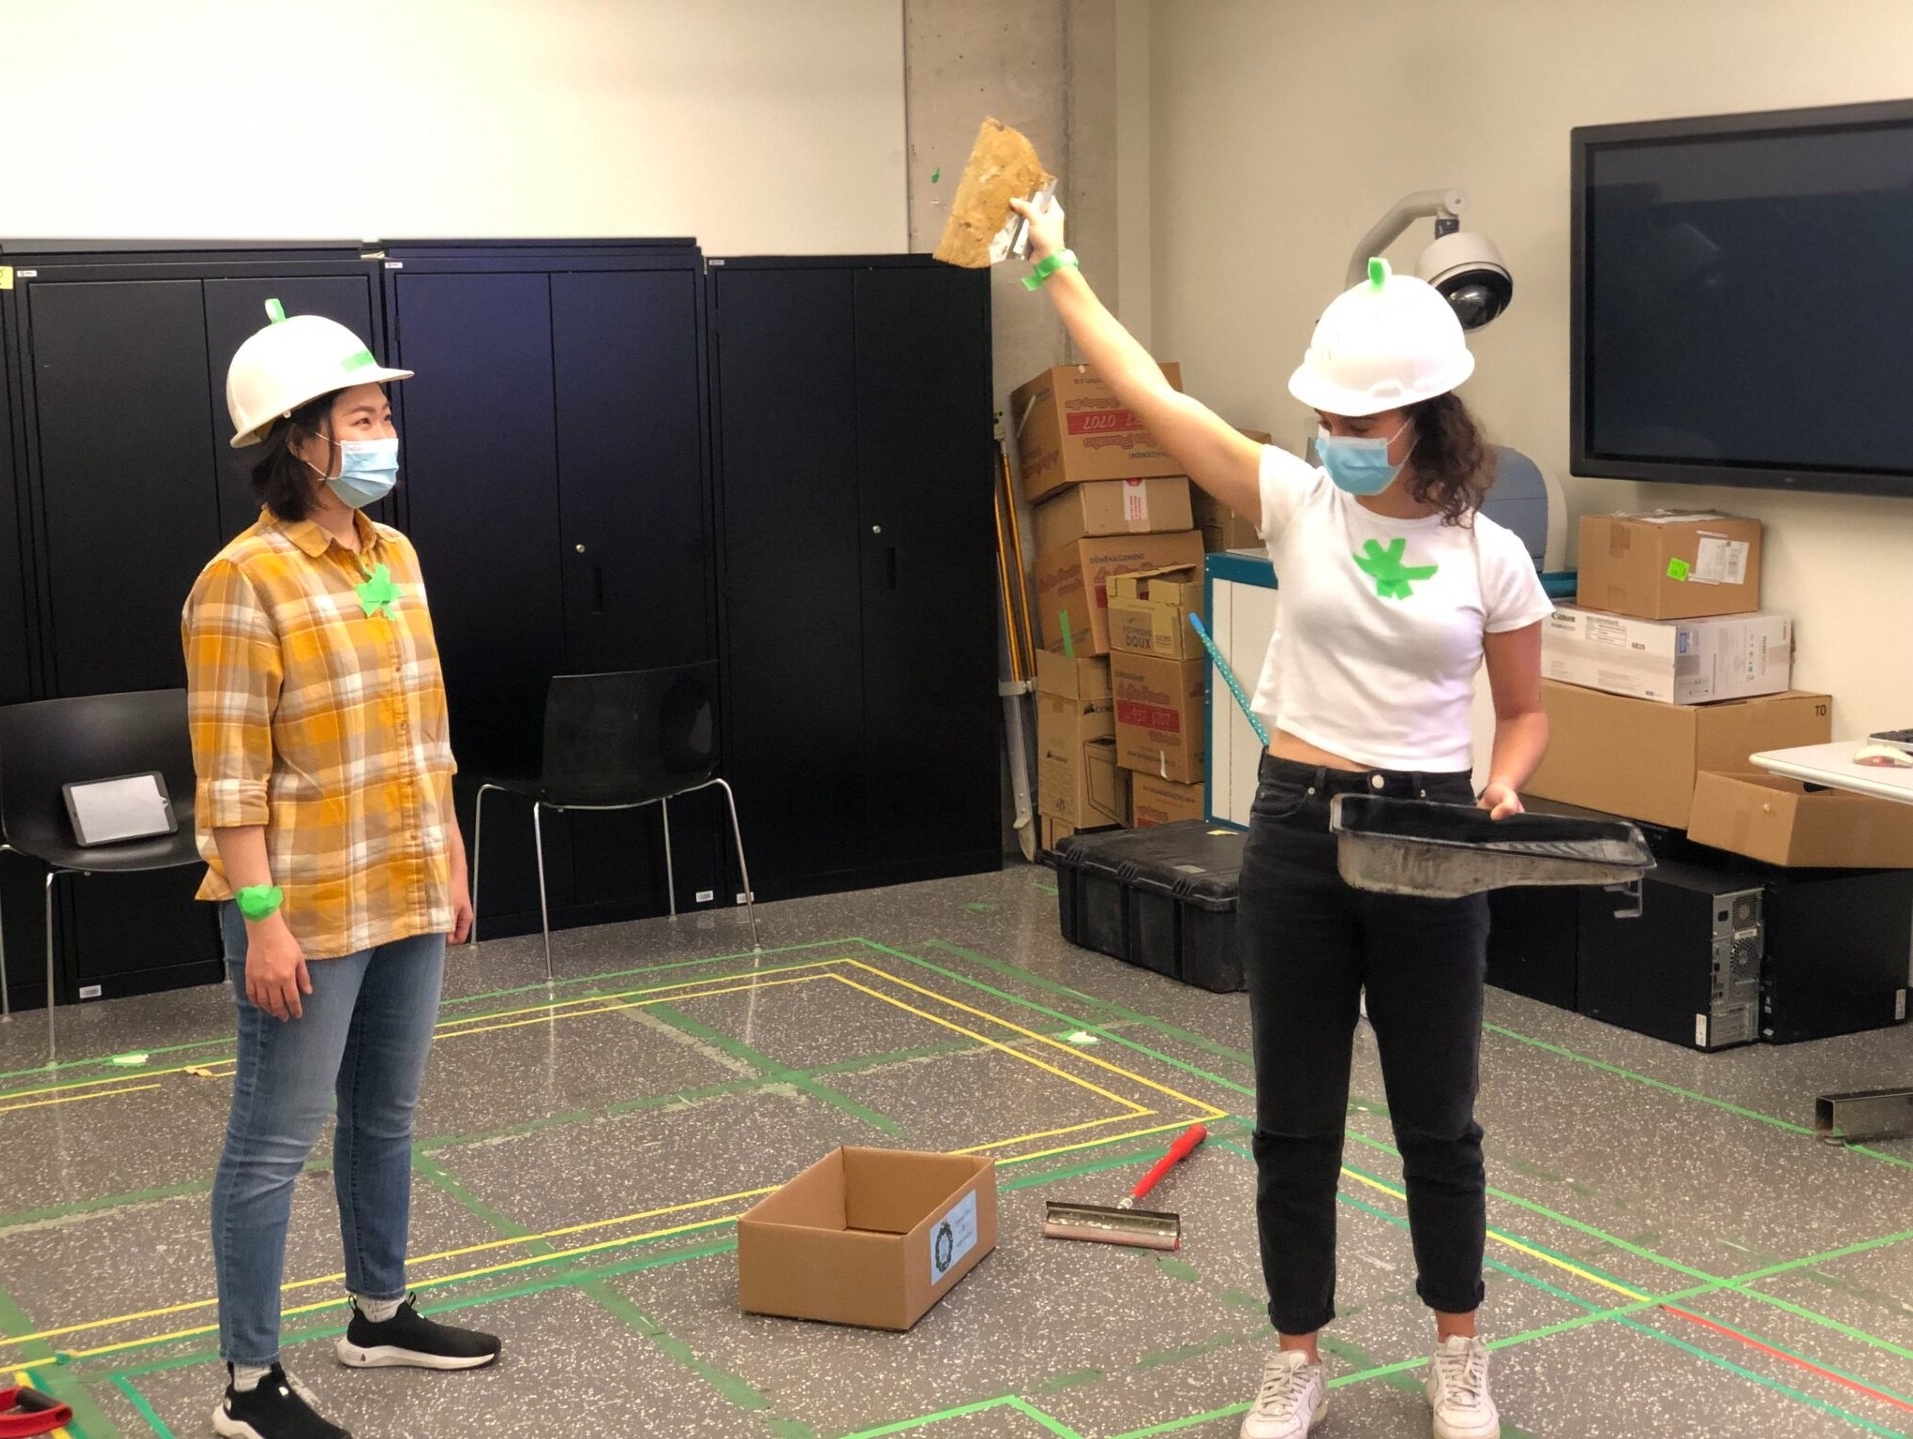 Two individuals wearing white hard hats, face masks, and casual clothes are in a room with black cabinets and boxes, engaging in an activity where one person holds a paint tray and raises a piece of material, with the floor marked with green tape.